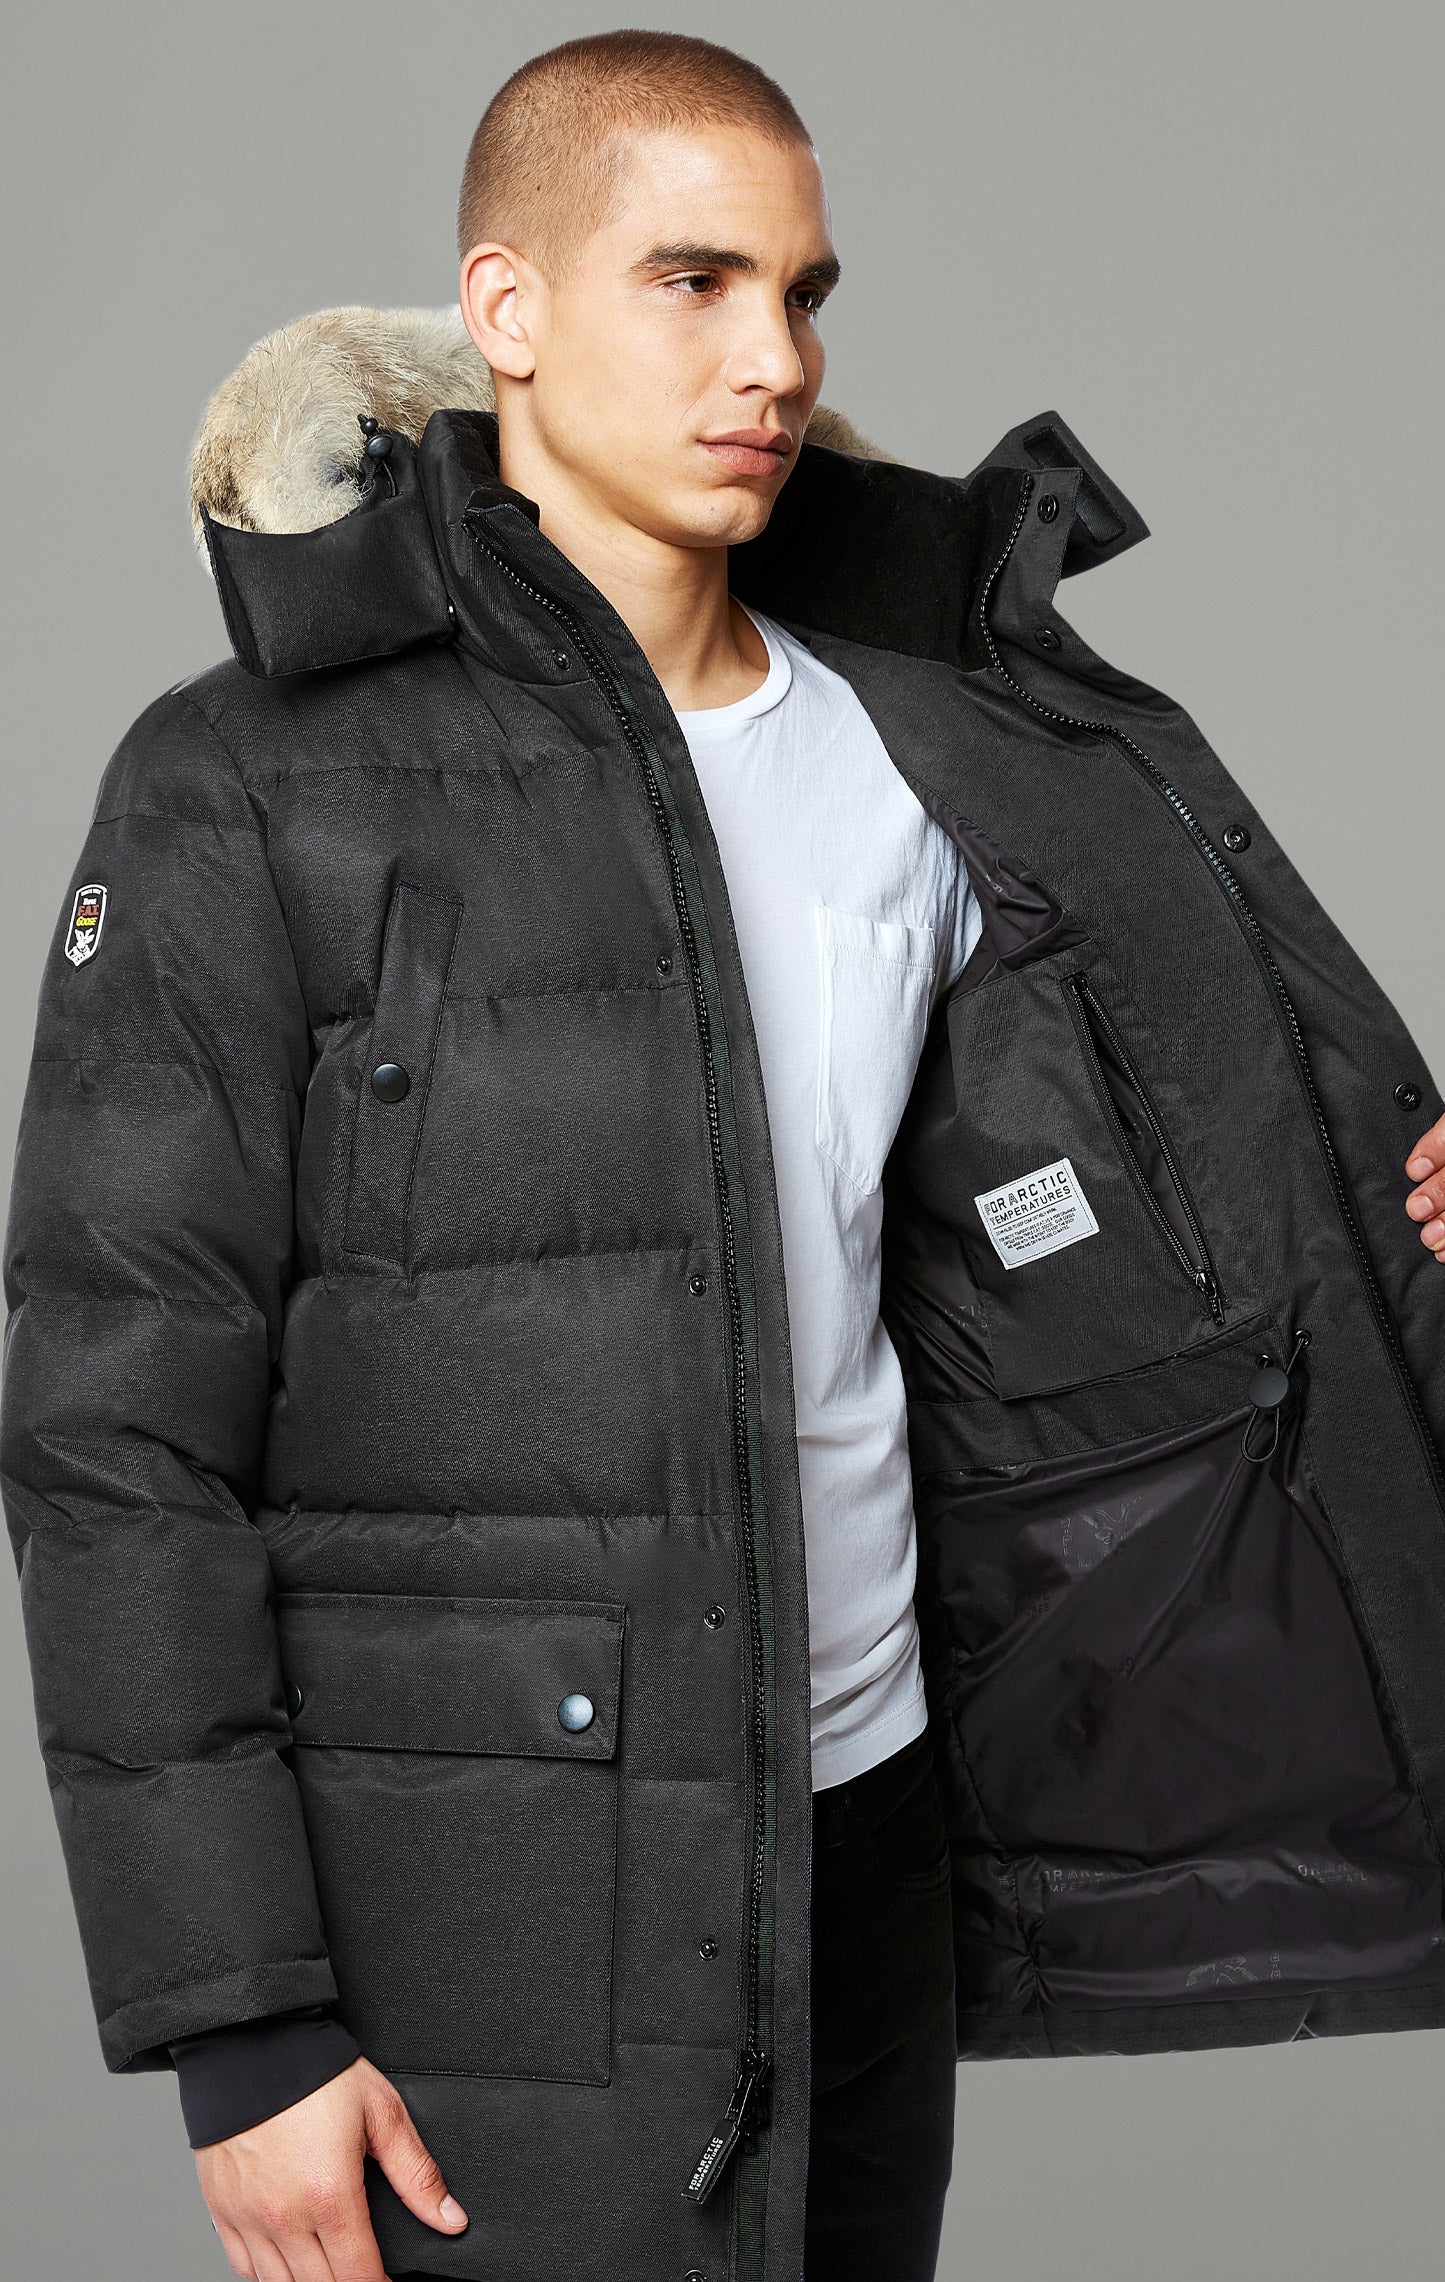 Whose Sale Factory Direct Detachable Hood with Fur for Men Winter